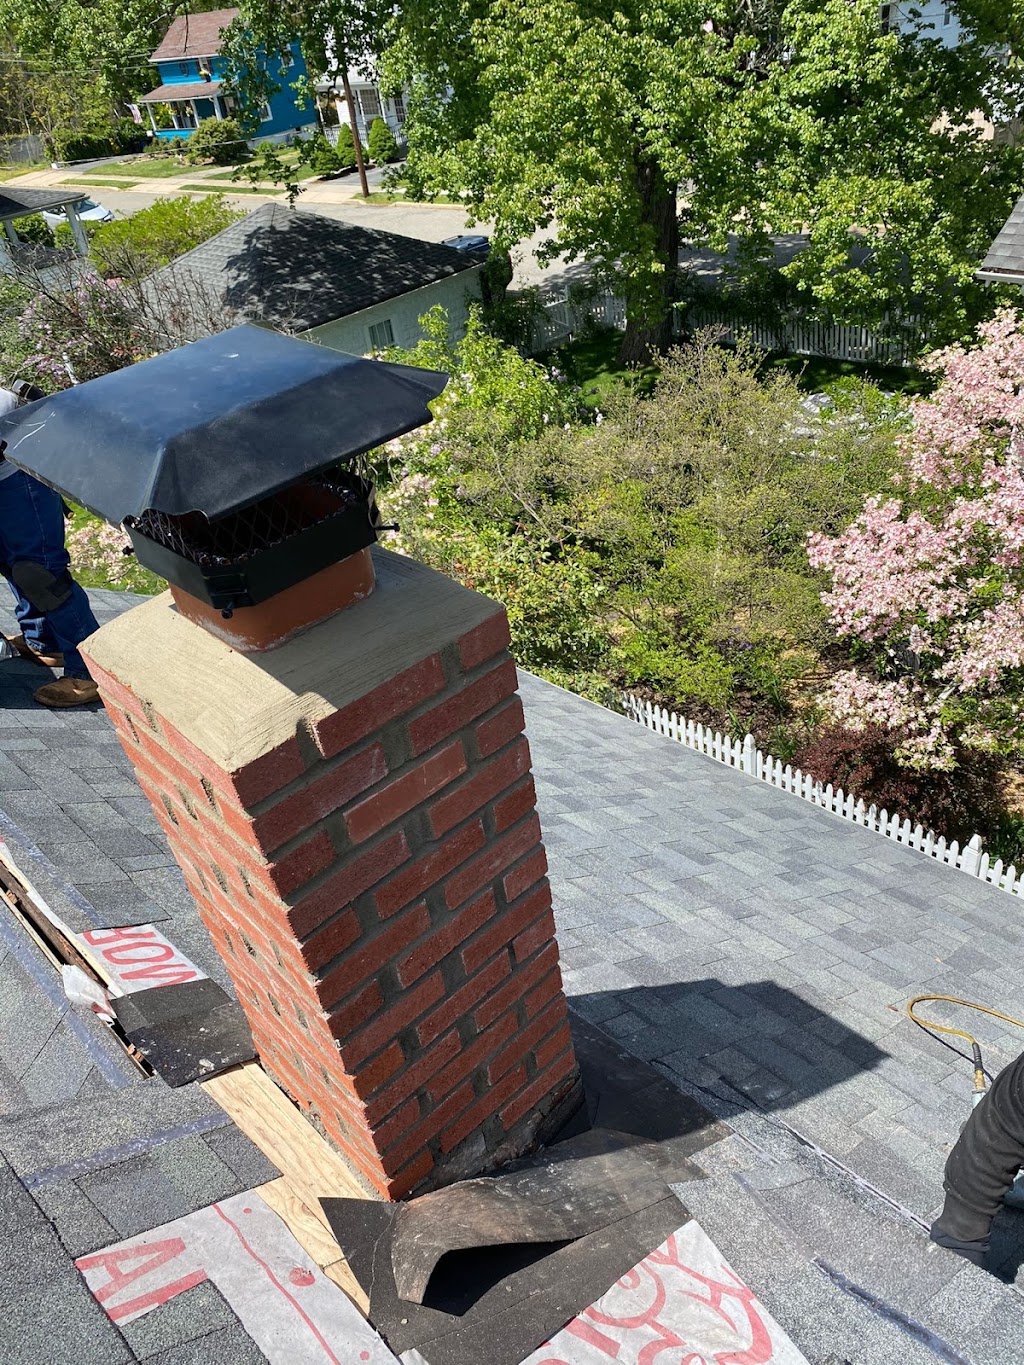 Pro Line Roofing And Chimney Inc | 4 Harrison Dr, Shirley, NY 11967 | Phone: (631) 992-8555